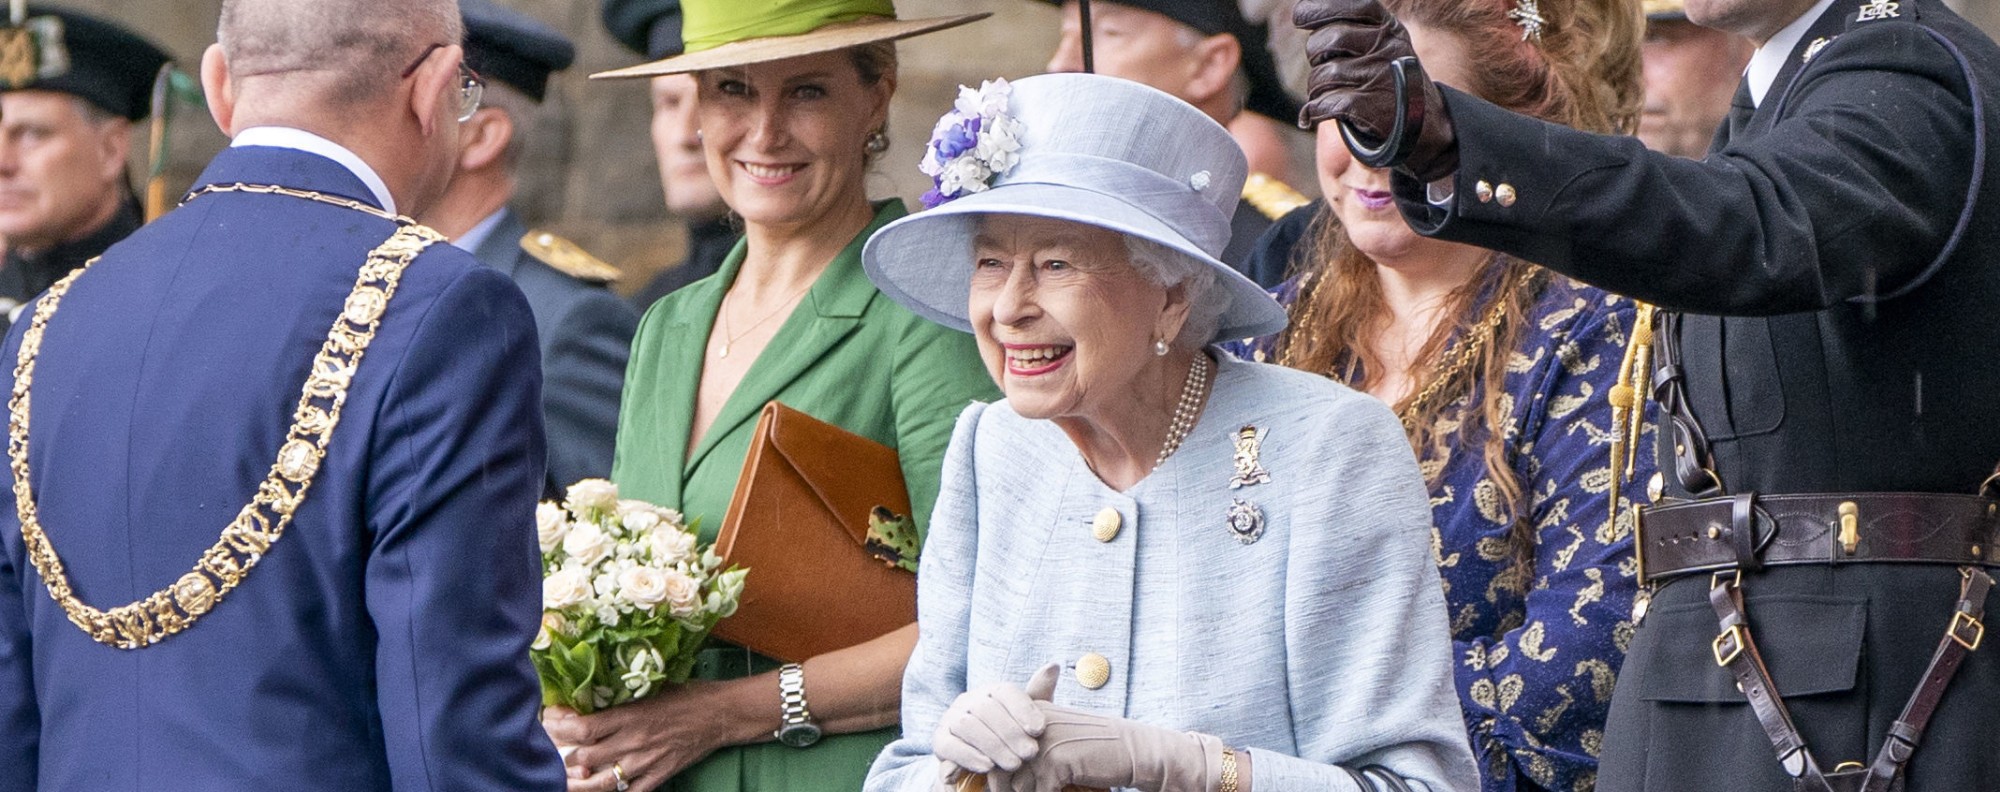 Britain's Queen Elizabeth II is greeted as she attends the Ceremony of the Keys on the forecourt of the Palace of Holyroodhouse in Edinburgh on June 27, 2022, as part of her traditional trip to Scotland for Holyrood week. Photo: PA via AP